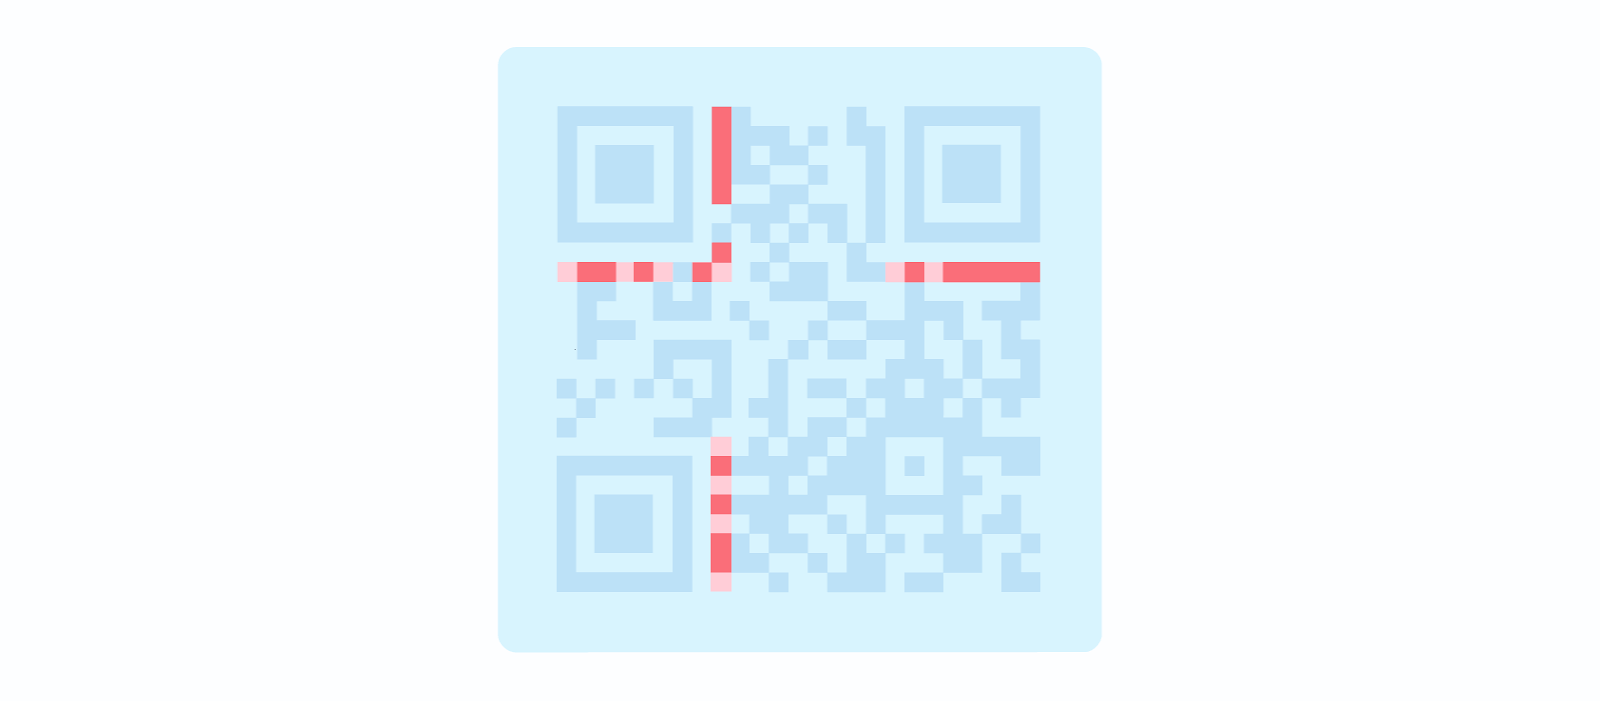 Example of QR Code format patterns